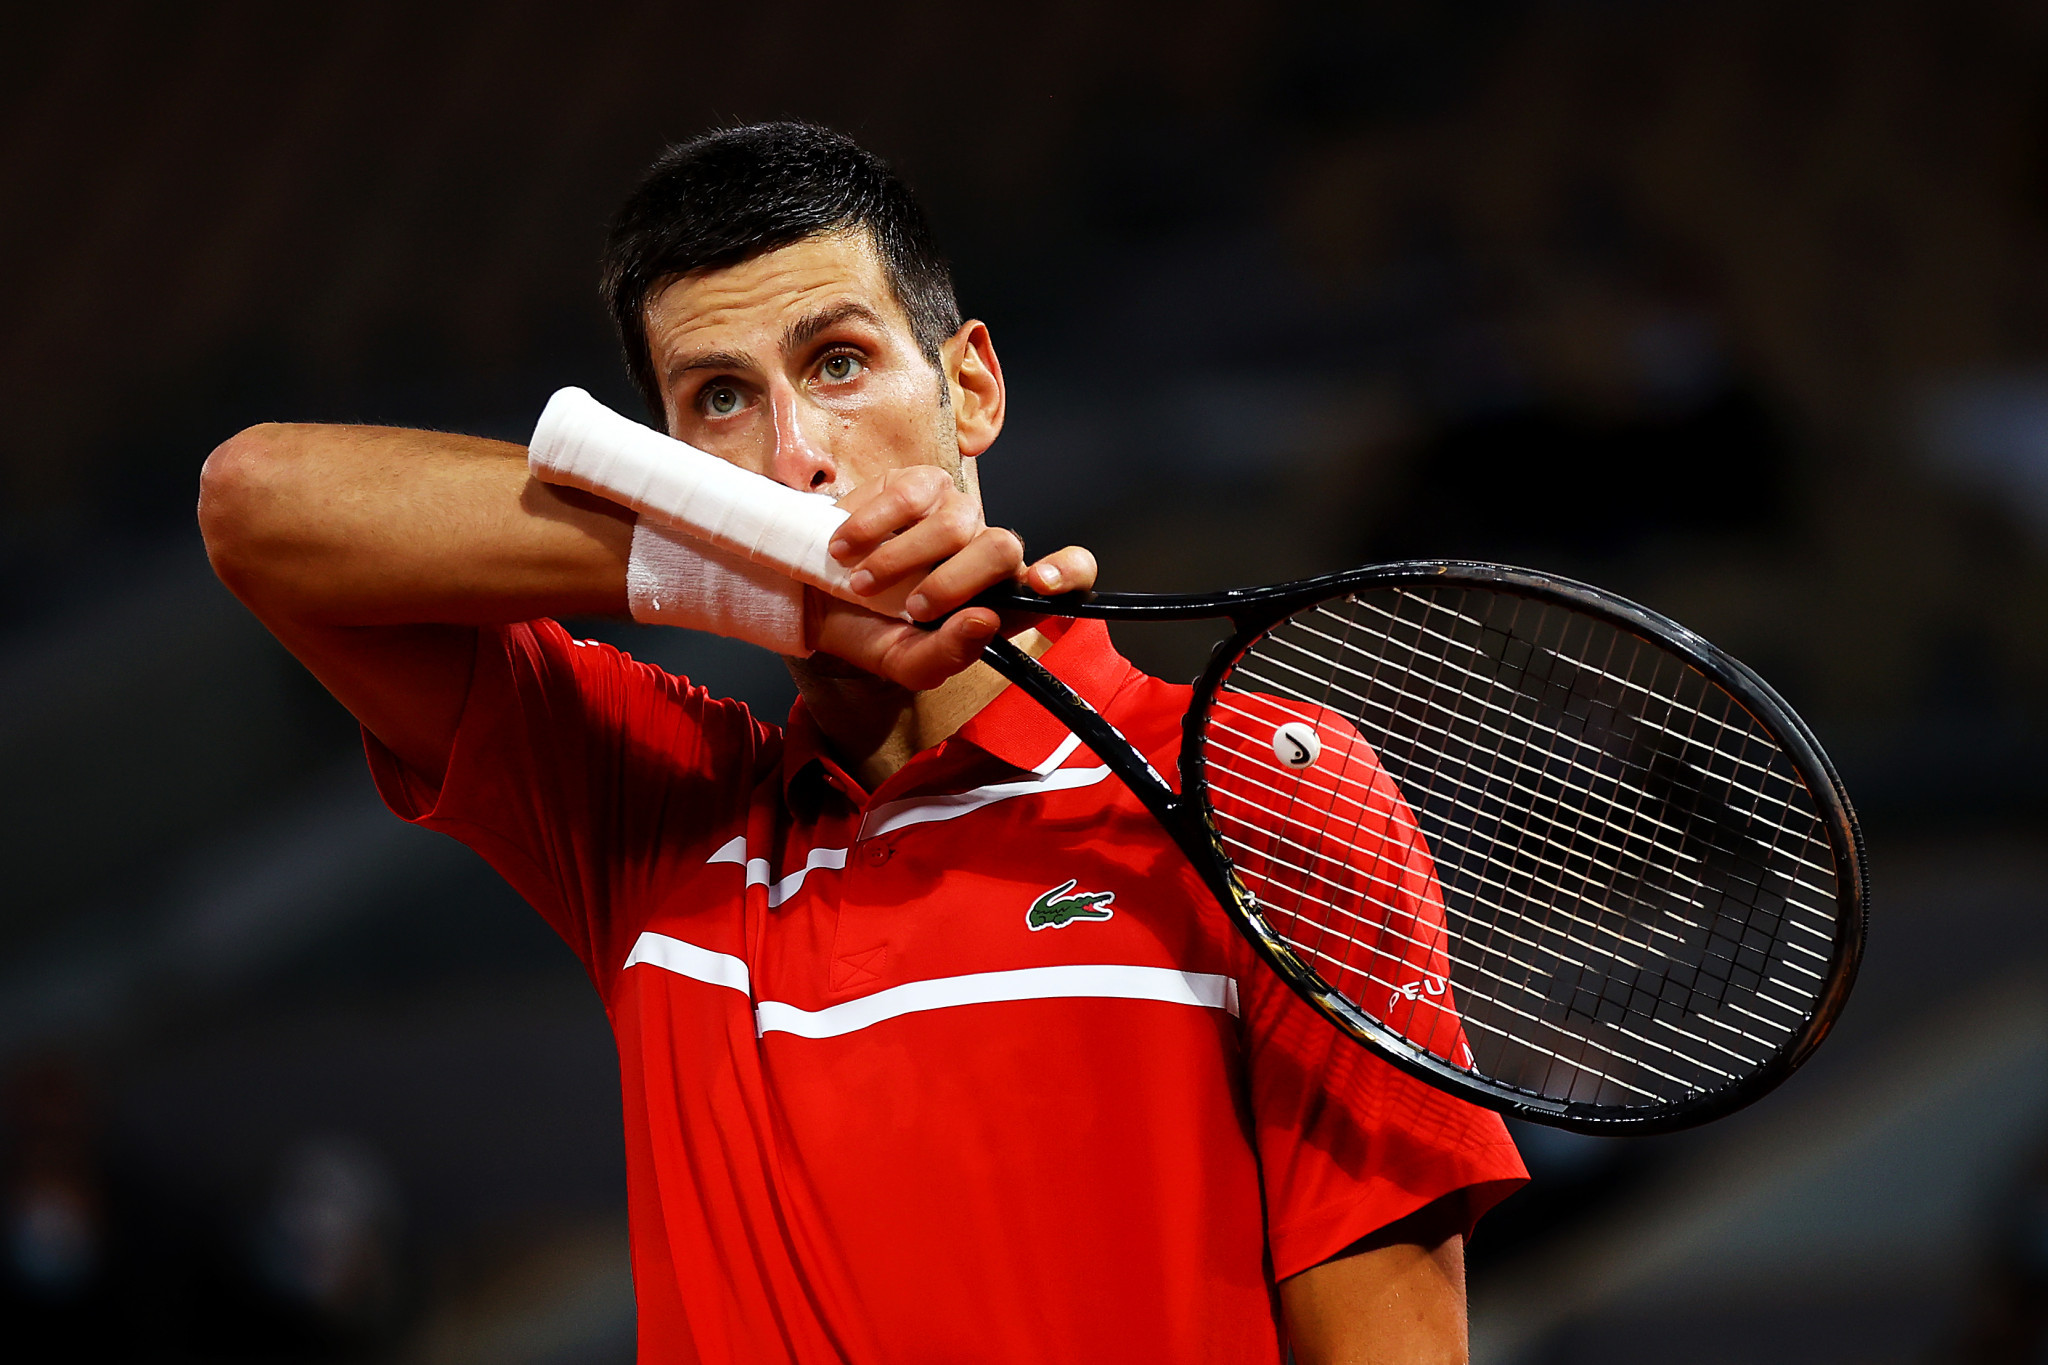 Djokovic accidentally strikes line judge with ball during fourth round French Open win